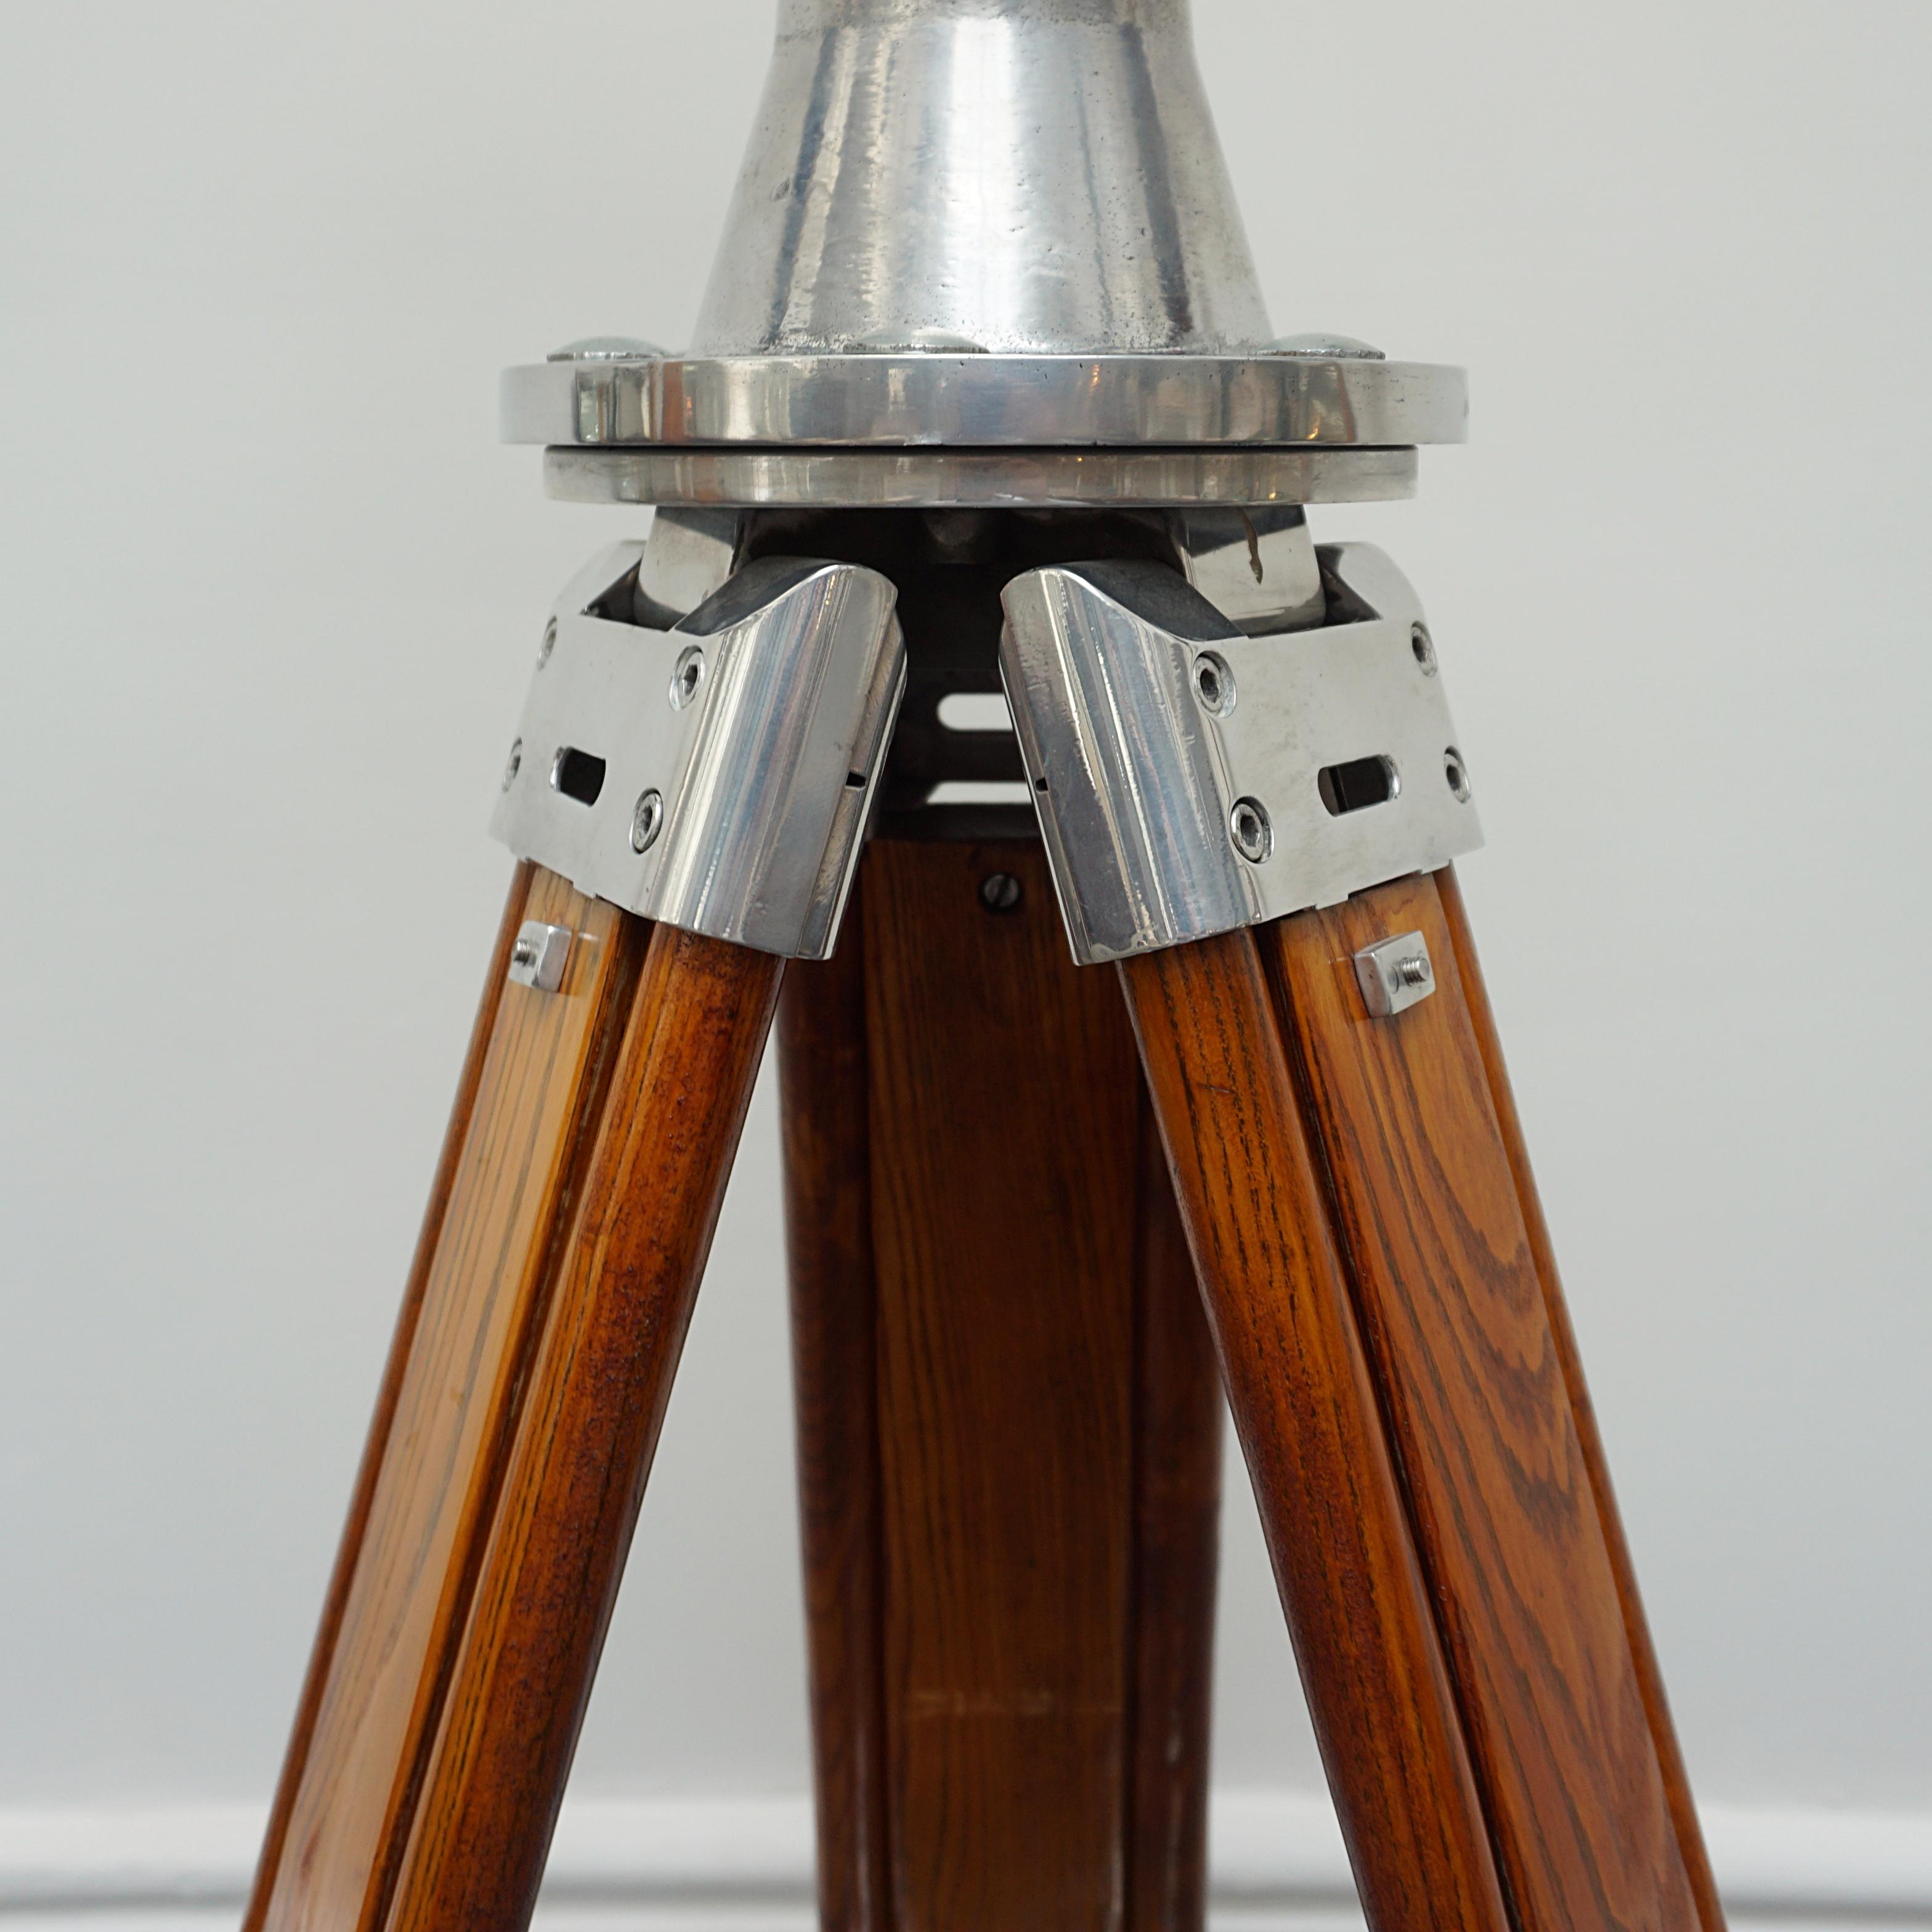 Fuji Meibo 15X80 chrome and brass marine binoculars on later extending wood and chromed metal stand with chromed conical feet. 15X magnification with 80mm objective lens. 

Dimensions: H 50cm W 21cm Length 50cm Stand H 100cm - 180cm 

All of our